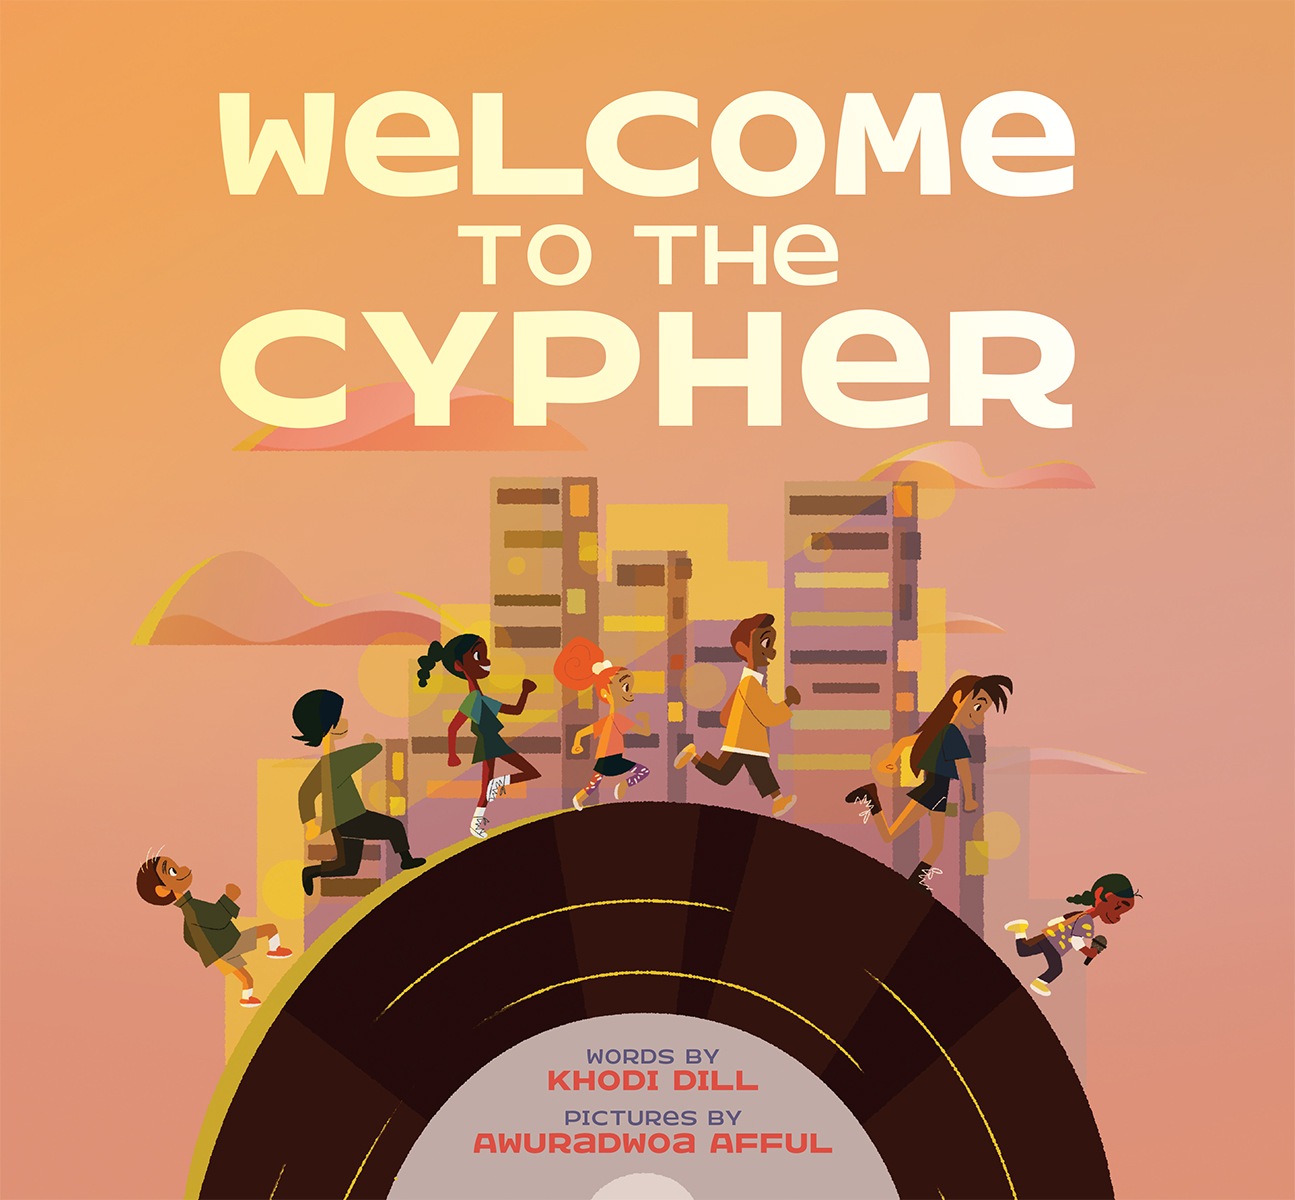 The cover of Welcome to the Cypher by Khodi Dill.